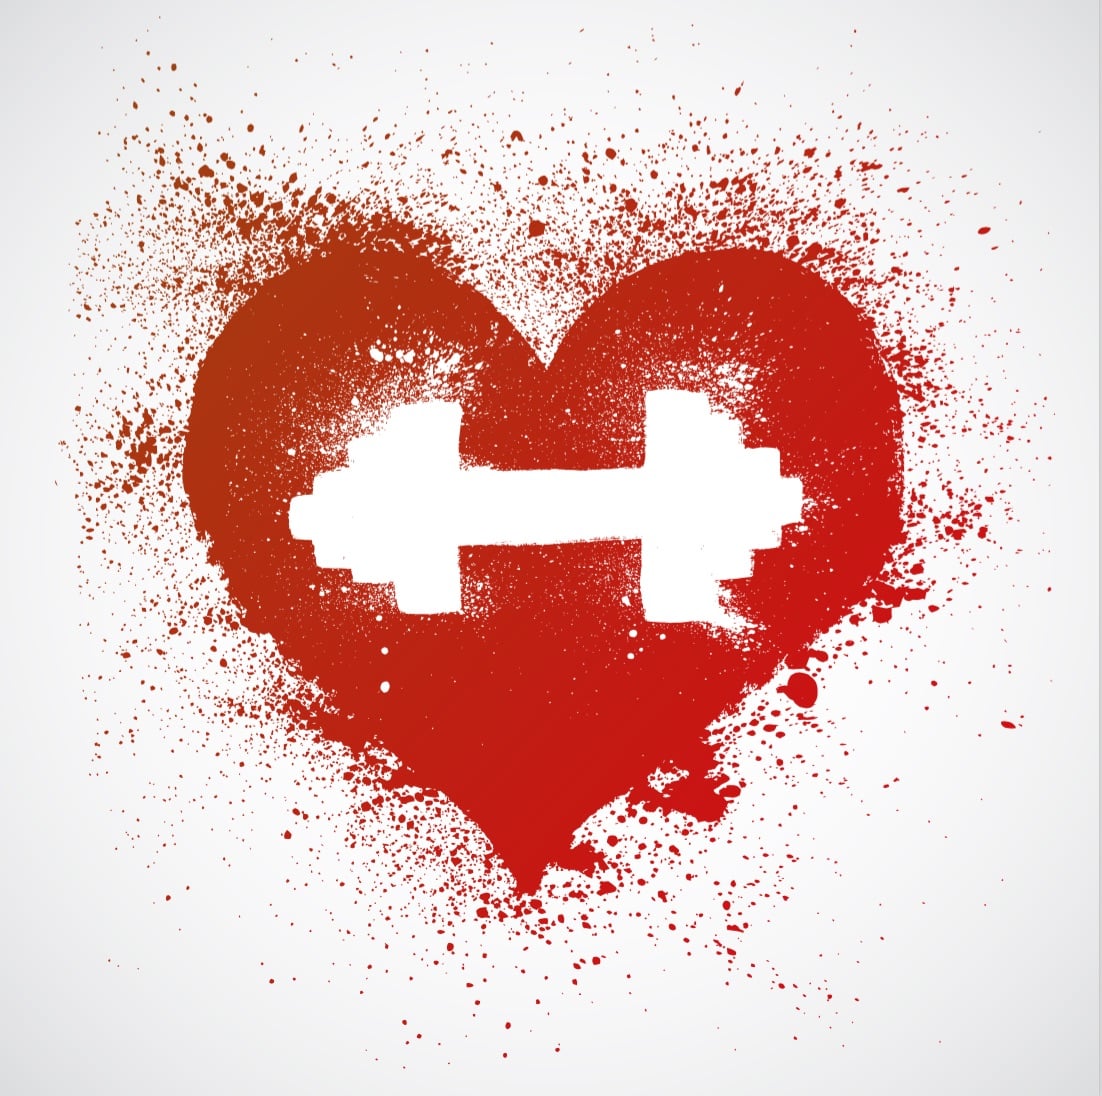 Graphic of a red heart with a white dumbbell in the middle